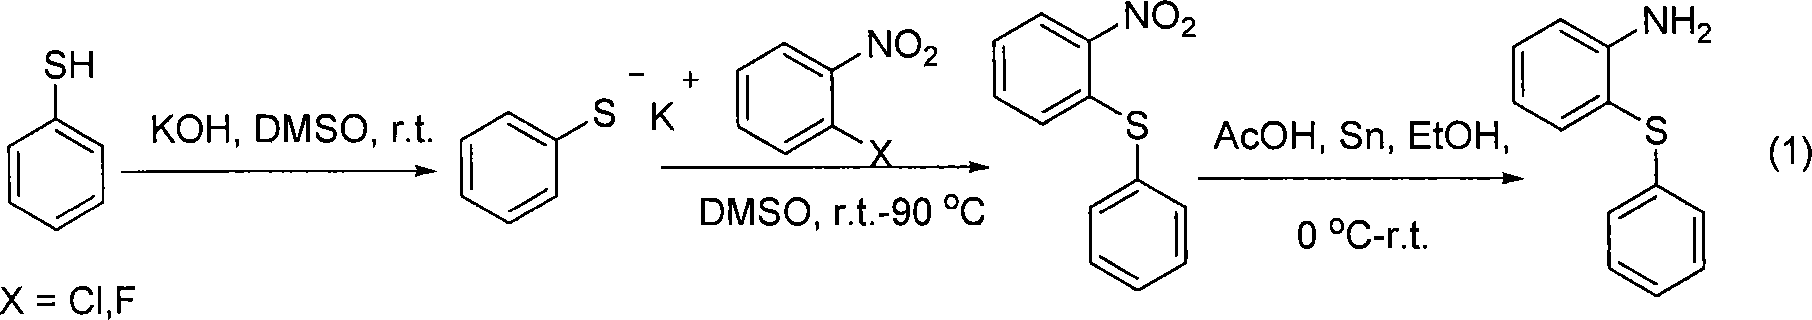 2,2,2-trifluoro-n-(2-arylsulf)-a rylamide derivatives and preparing method